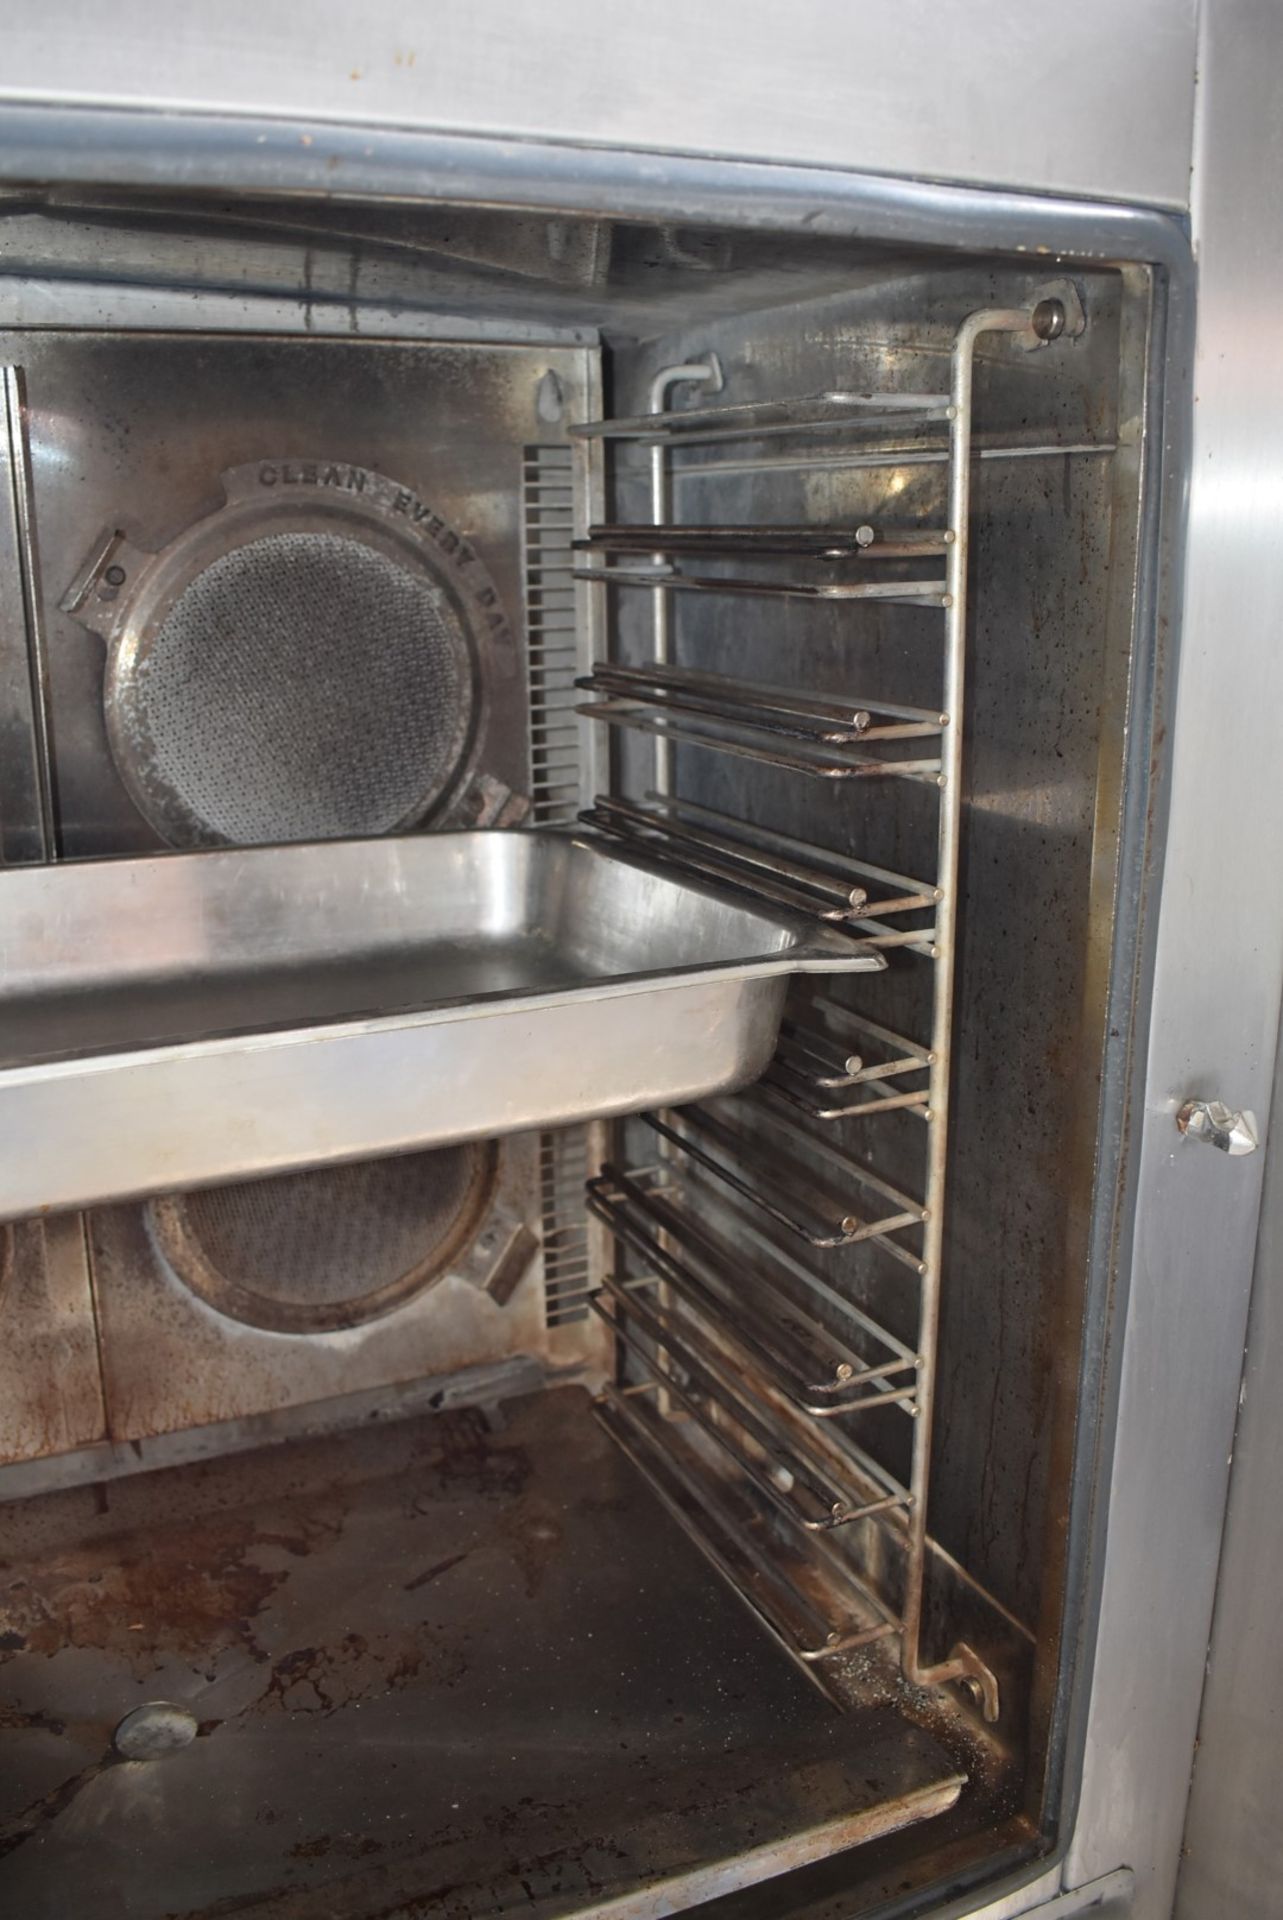 1 x Fri-Jado Turbo Retail 8 Grid Combi Oven - 3 Phase Combi Oven With Various Cooking Programs - Image 14 of 24